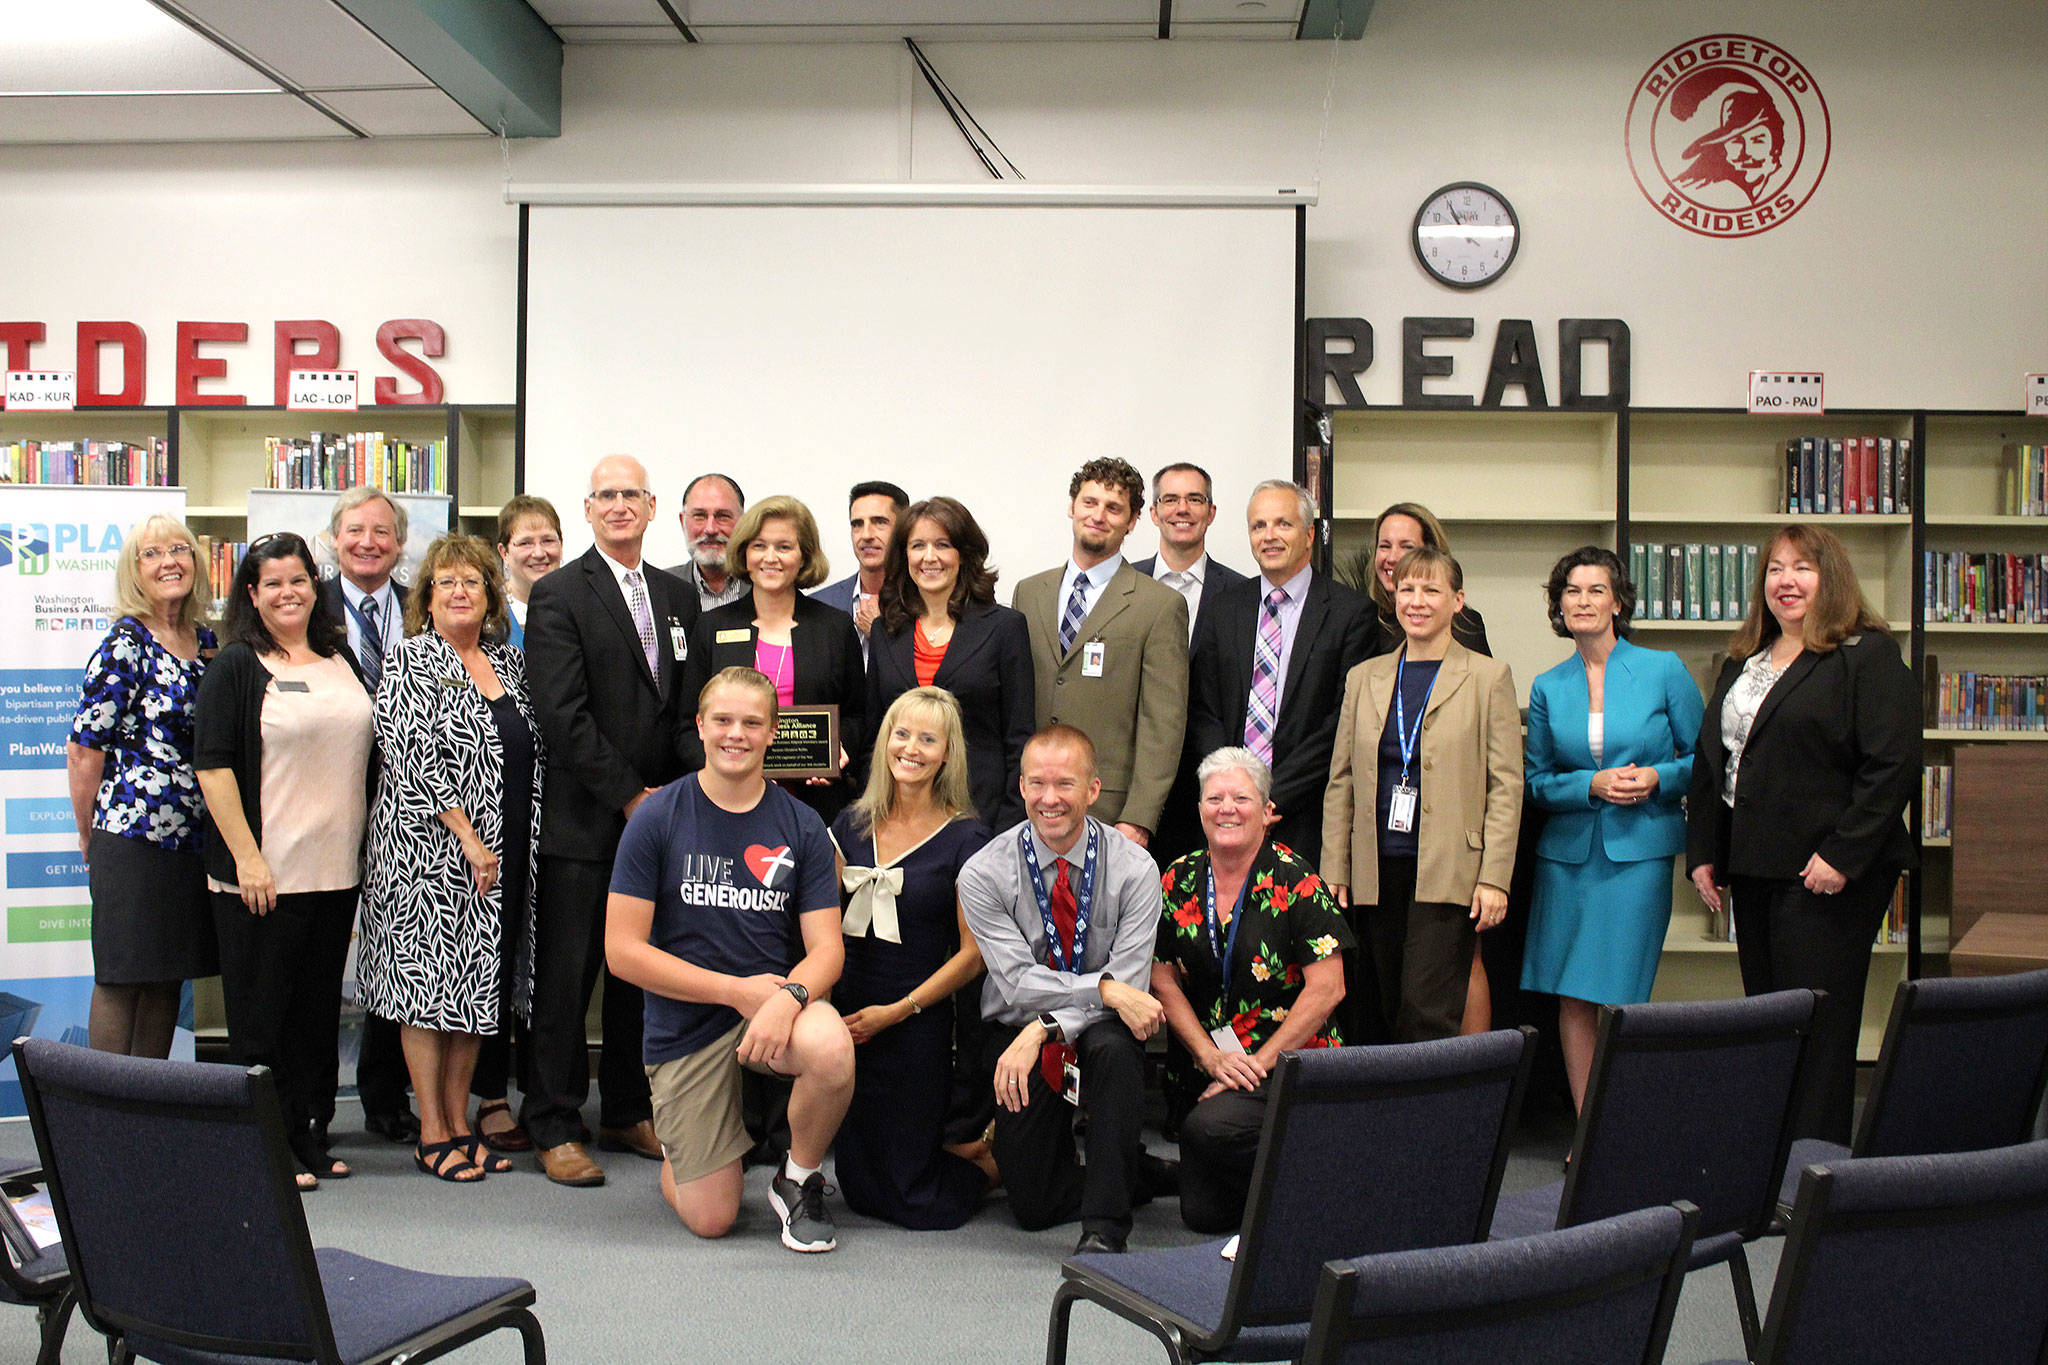 The Washington Business Alliance, administrators from the Central Kitsap School District, Sen. Christine Rolfes, D-23rd District, and Rolfes’ team gather in the Ridgetop Middle School Library, where Rolfes accepted an award from the WBA after they group toured the school’s aviation classroom.                                Michelle Beahm / Kitsap News Group